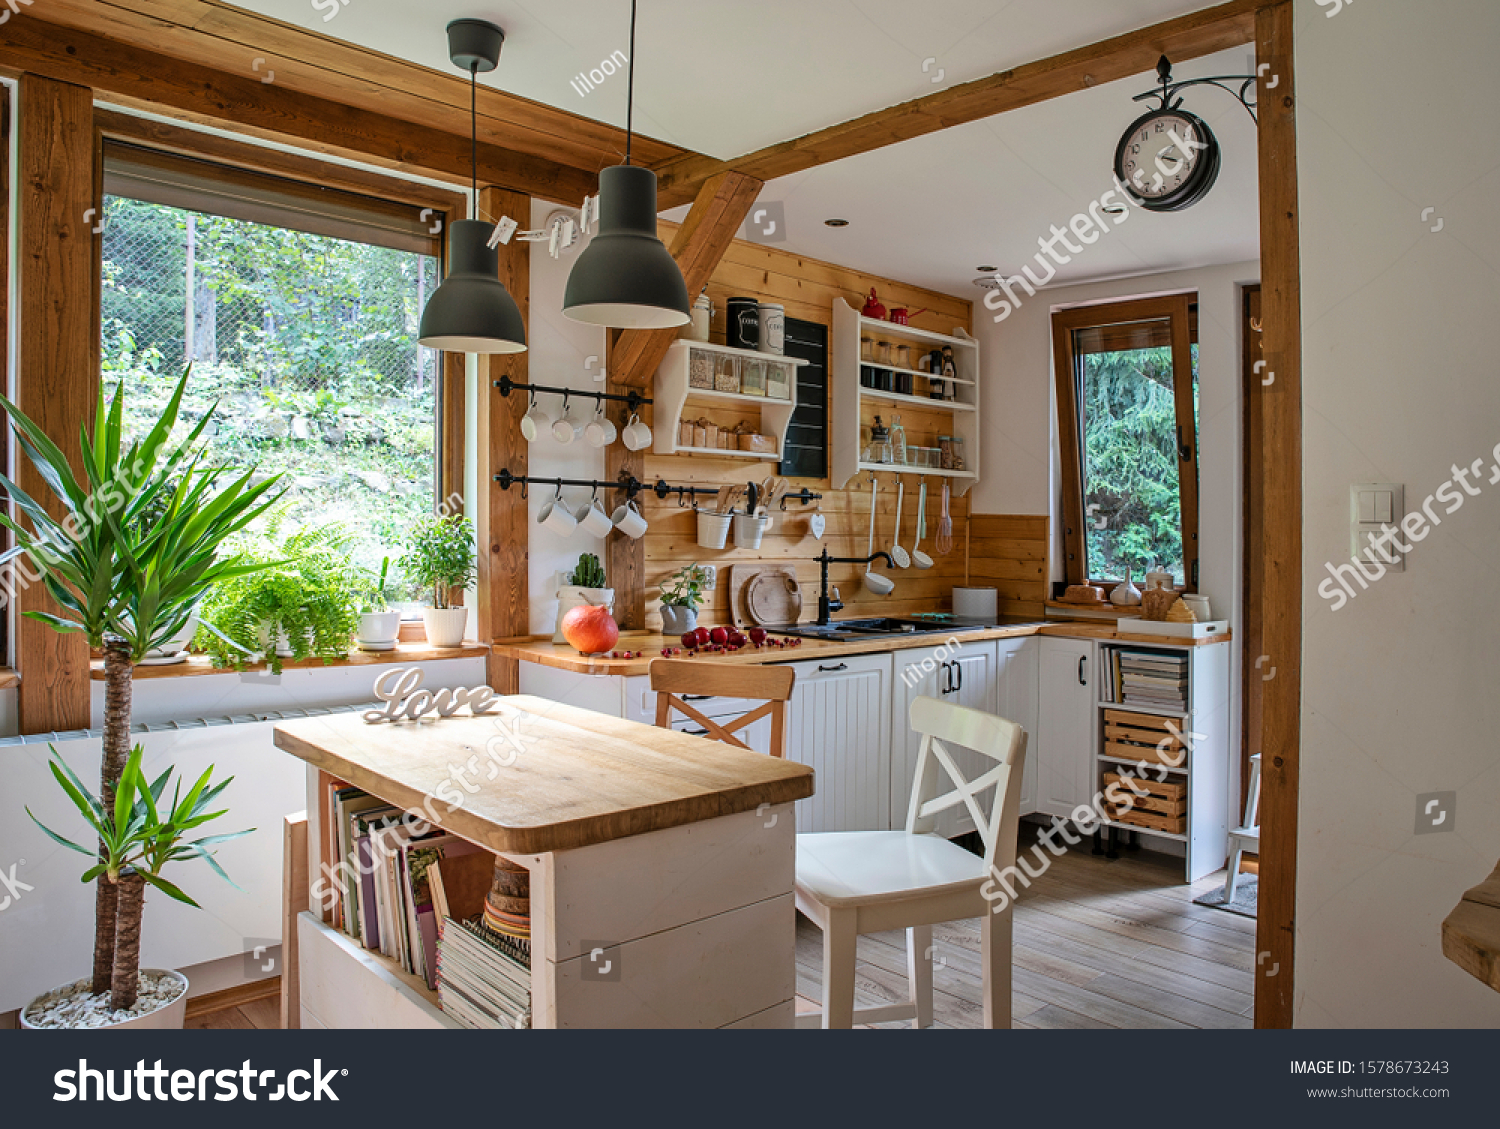 Vintage rustic interior of kitchen with white furniture, wooden wall and rustical decor. Bright indoor with window. Cottage style. #1578673243